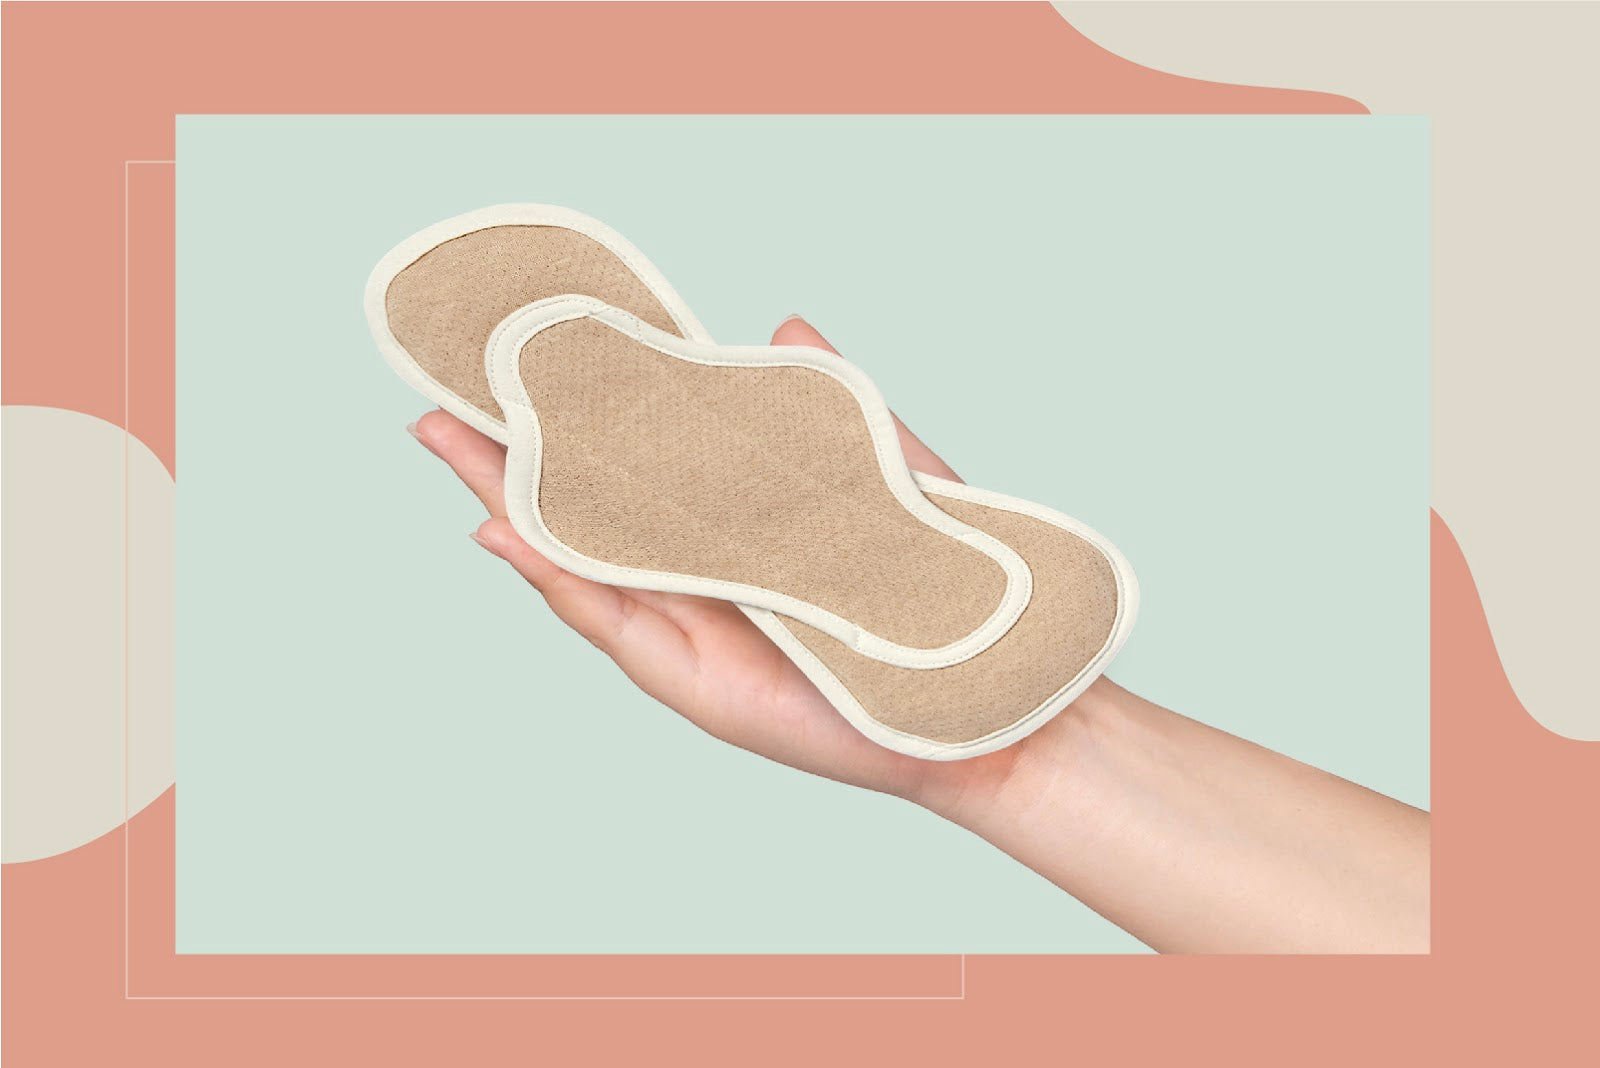 Are Reusable Cloth Period Pads Unhygienic?